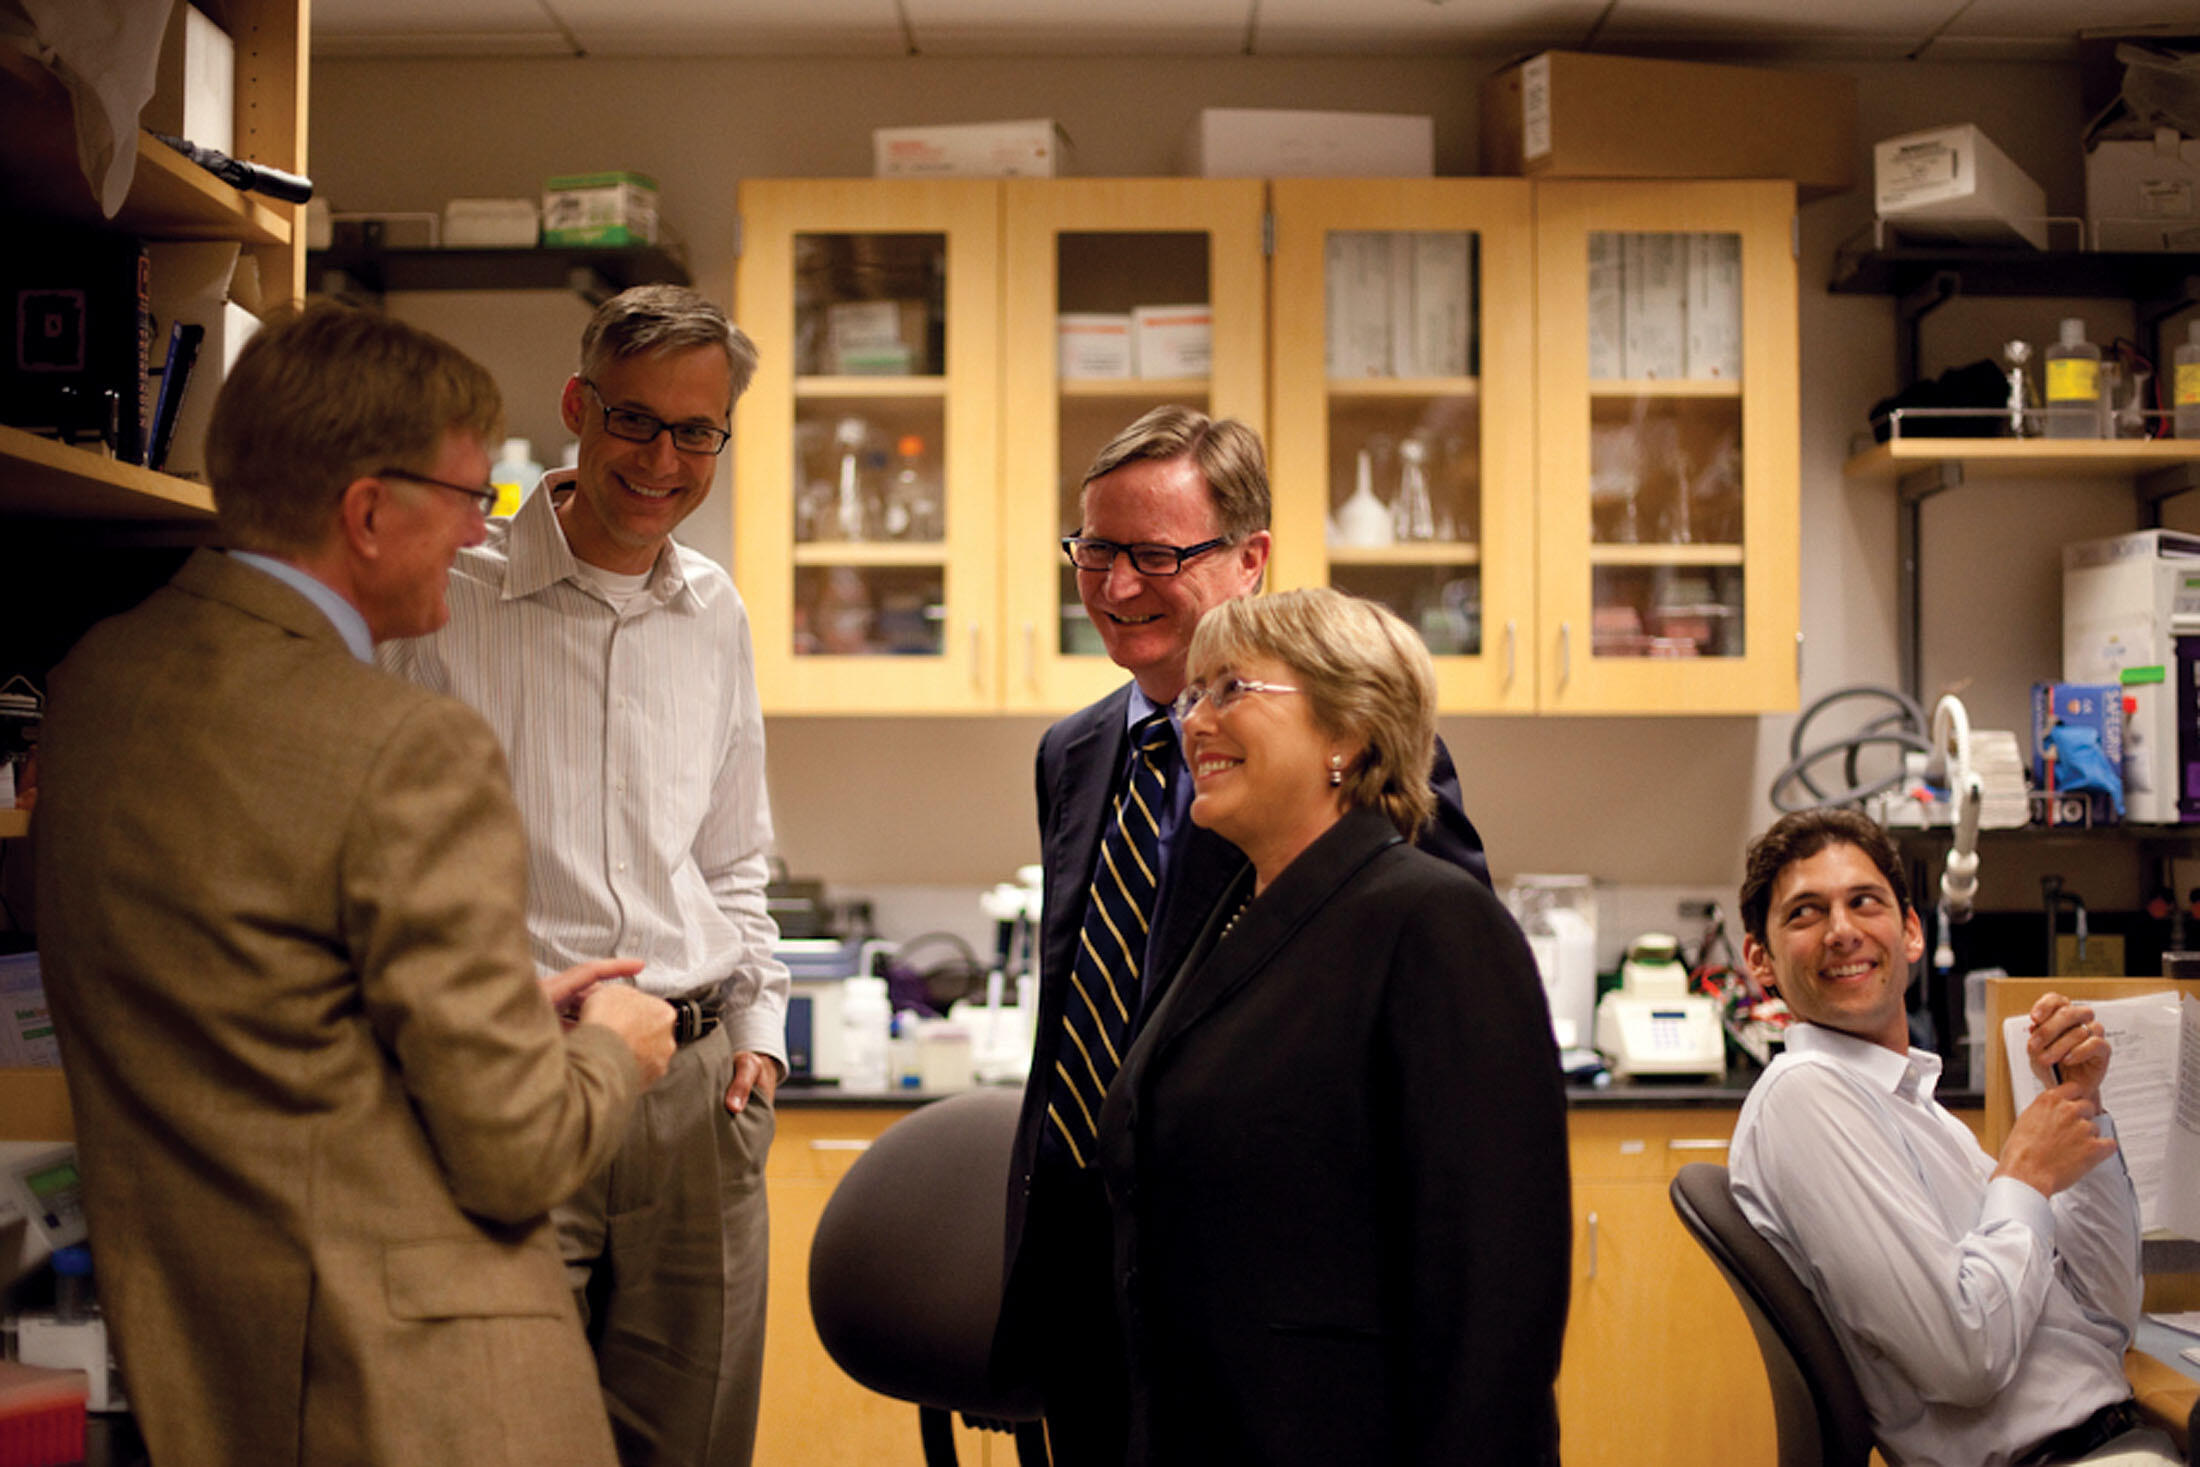 Michelle Bachelet visits a lab with Dr. Sam Hawgood, Dean of the UC San Francisco School of Medicine, faculty and researchers. (Photo by Rhyen Coombs.)